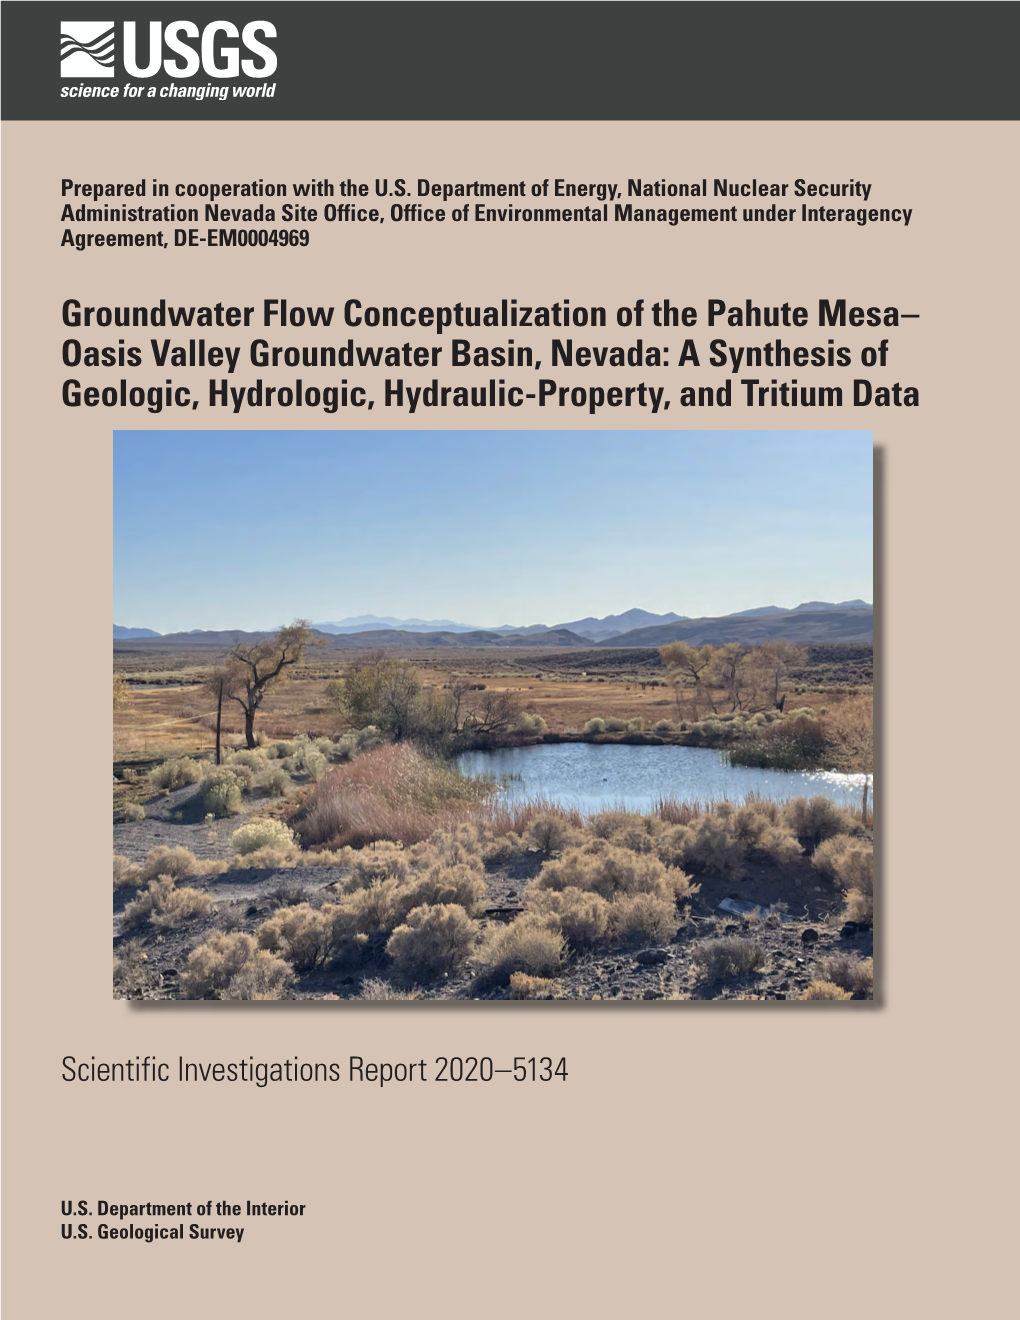 Groundwater Flow Conceptualization of the Pahute Mesa–Oasis Valley